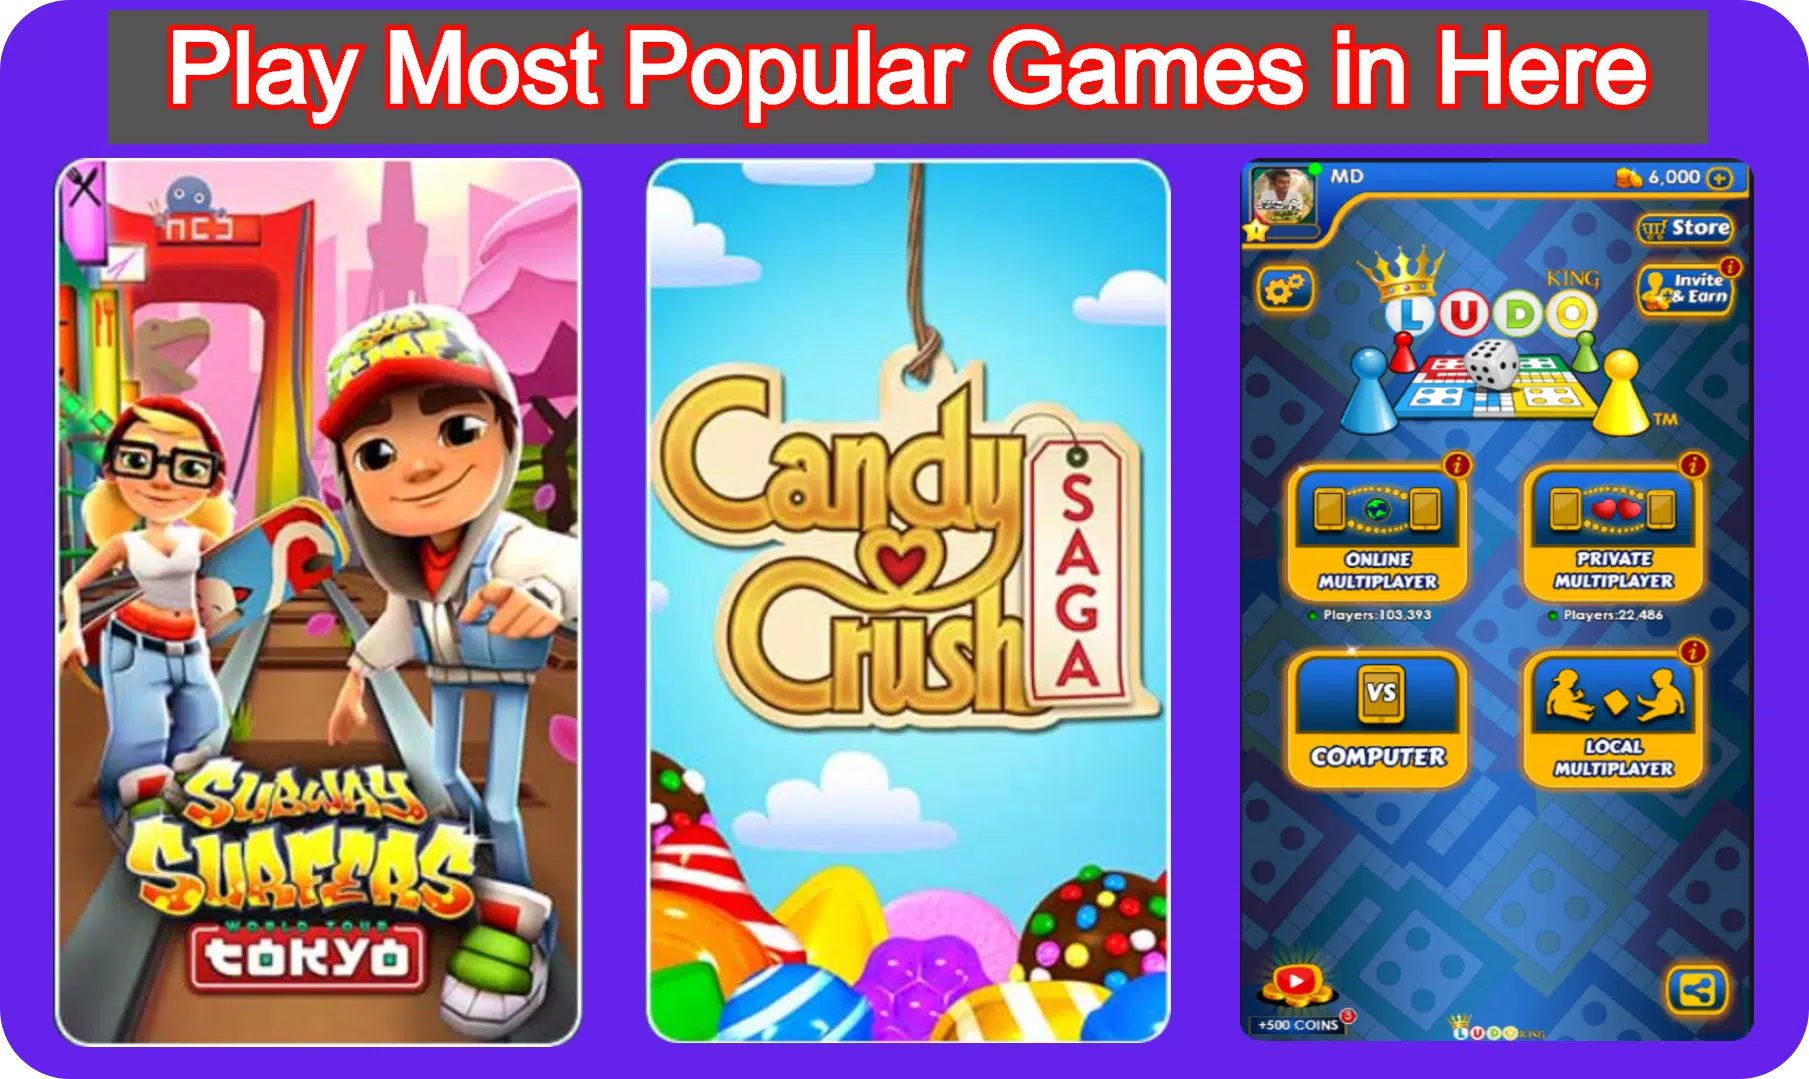 62 Games In 1 App - Multi Game for Android - Download